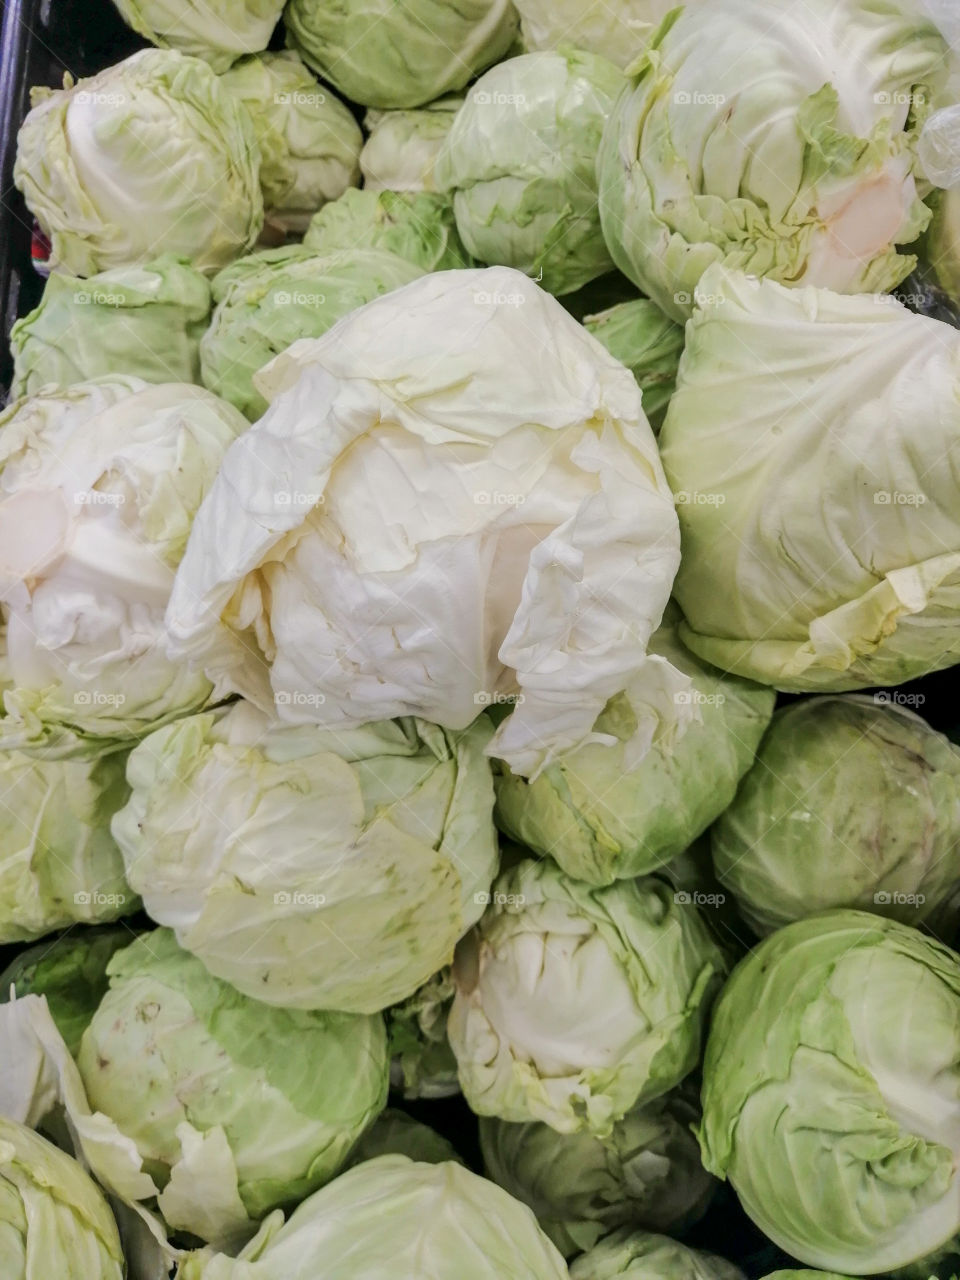 Bulk cabbage for sale in a grocery store